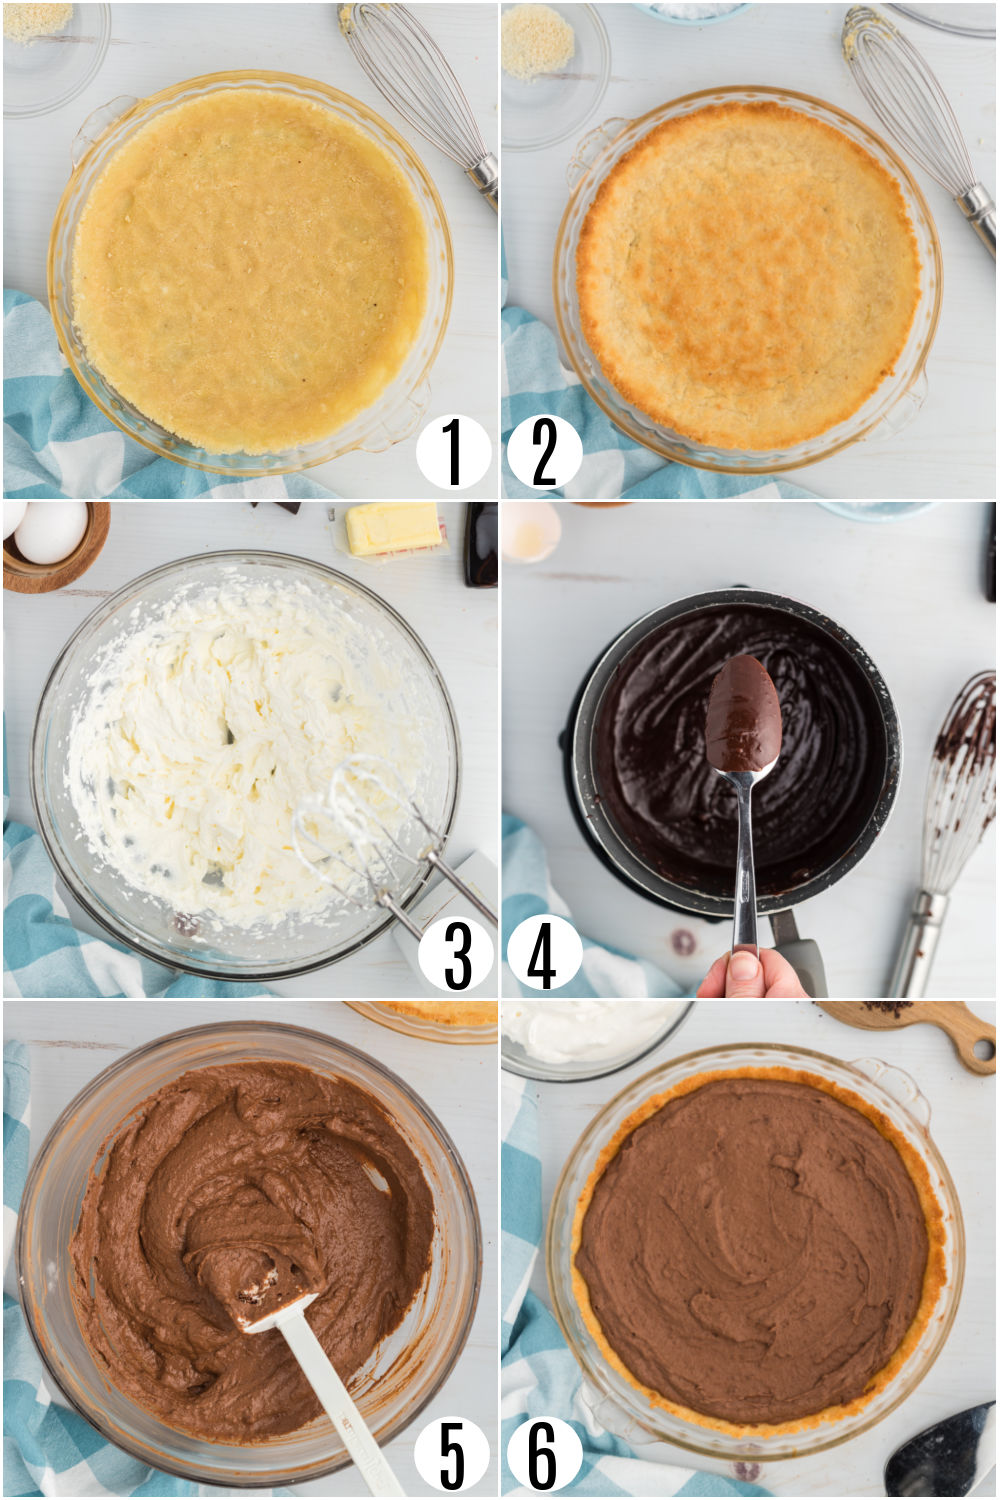 Step by step photos showing how to make chocolate pudding pie.